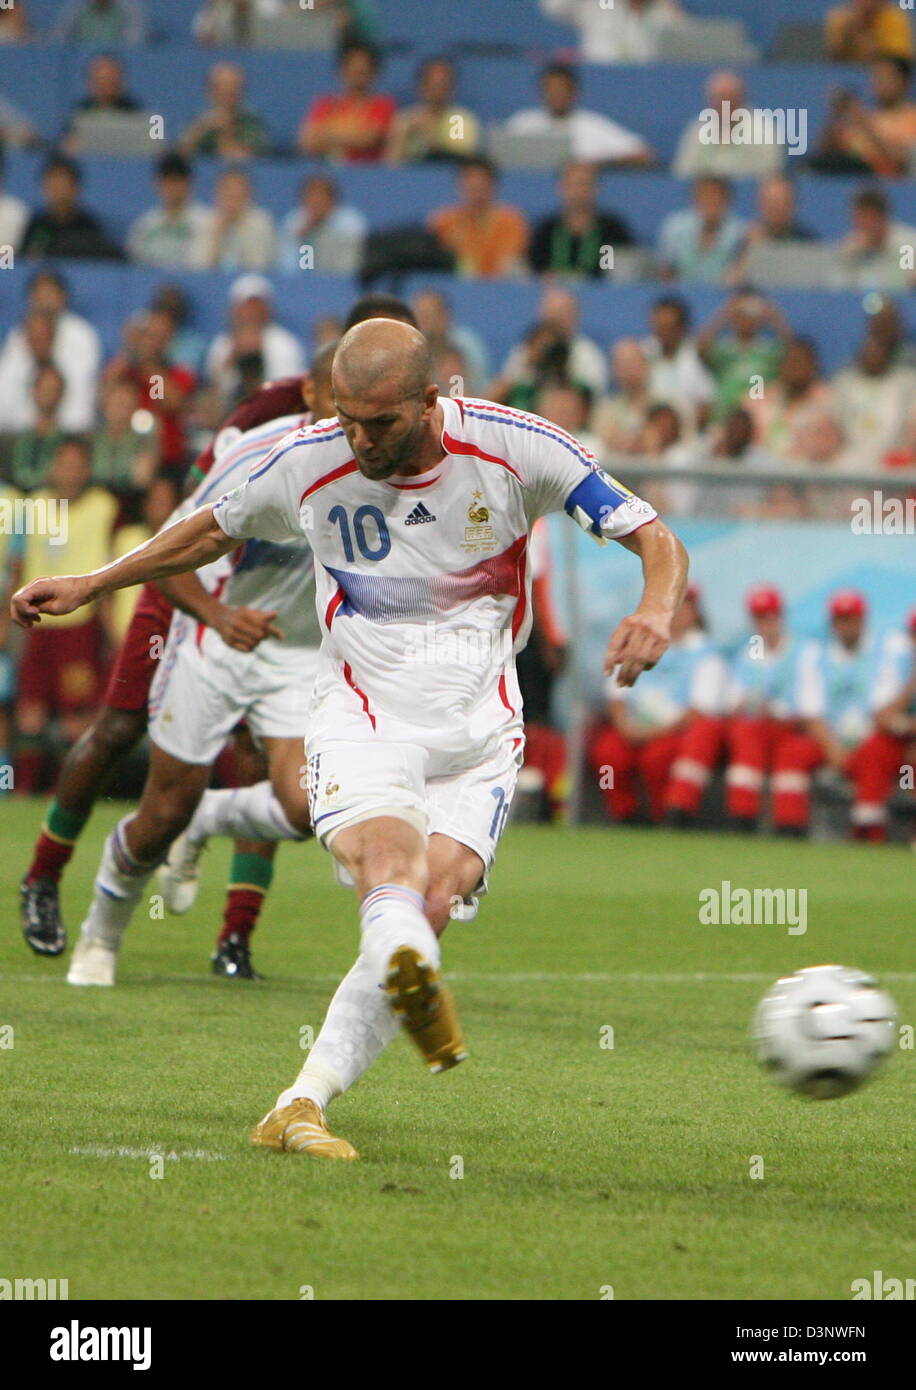 French Zinedine Zidane shoots a penalty to score the 0-1 during the semi final match of the 2006 FIFA World Cup Portugal vs. France in Munich, Germany, Wednesday 05 July 2006. DPA/BERND WEISSBROD +++ Mobile Services OUT +++ Please refer to FIFA's terms and conditions Stock Photo